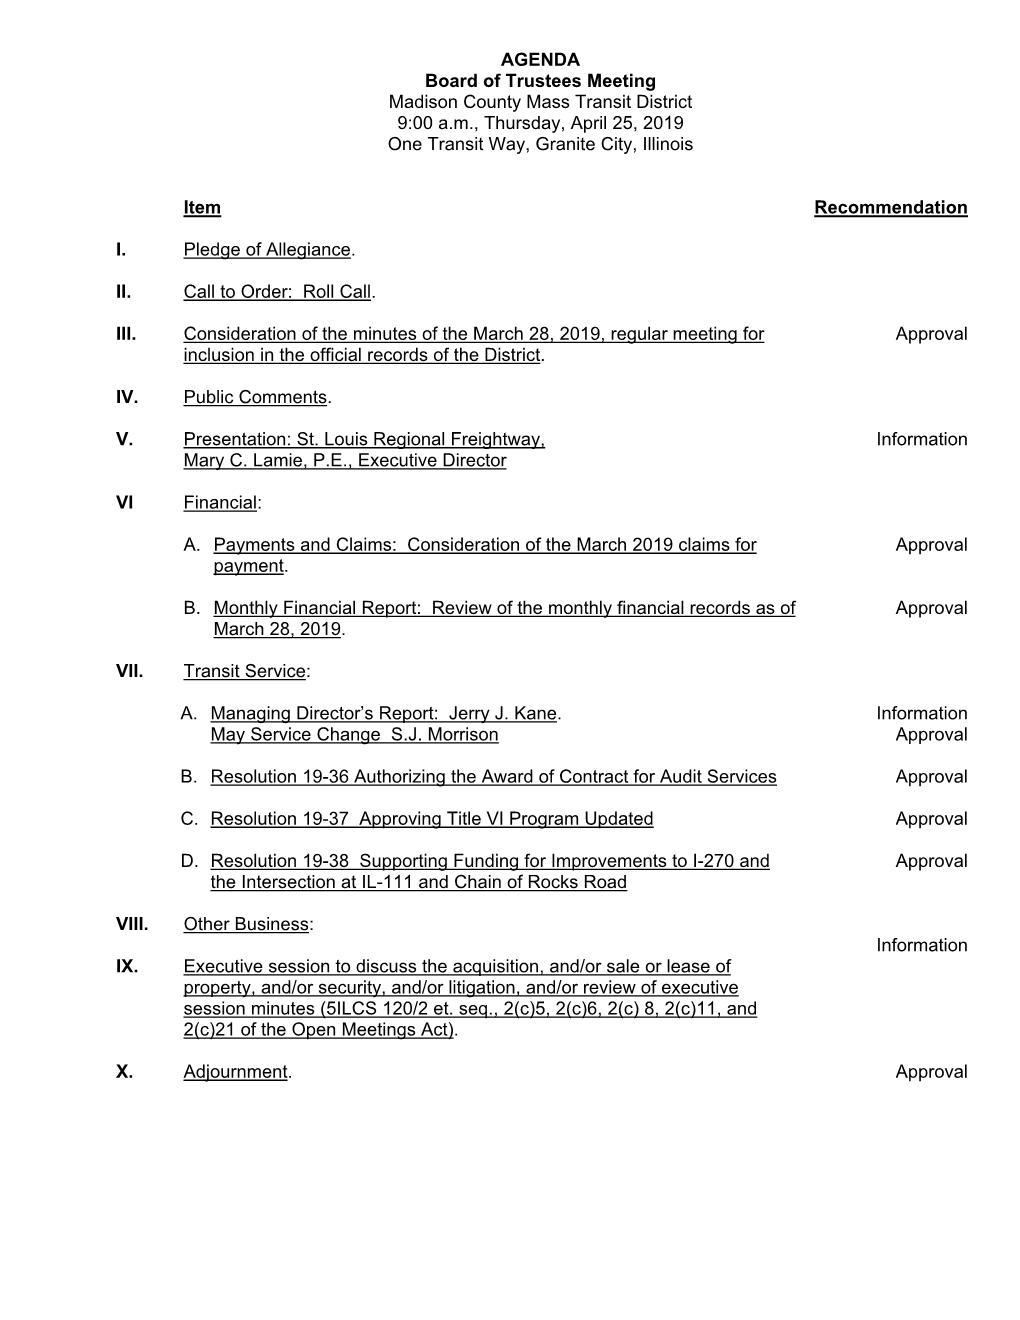 AGENDA Board of Trustees Meeting Madison County Mass Transit District 9:00 A.M., Thursday, April 25, 2019 One Transit Way, Granite City, Illinois